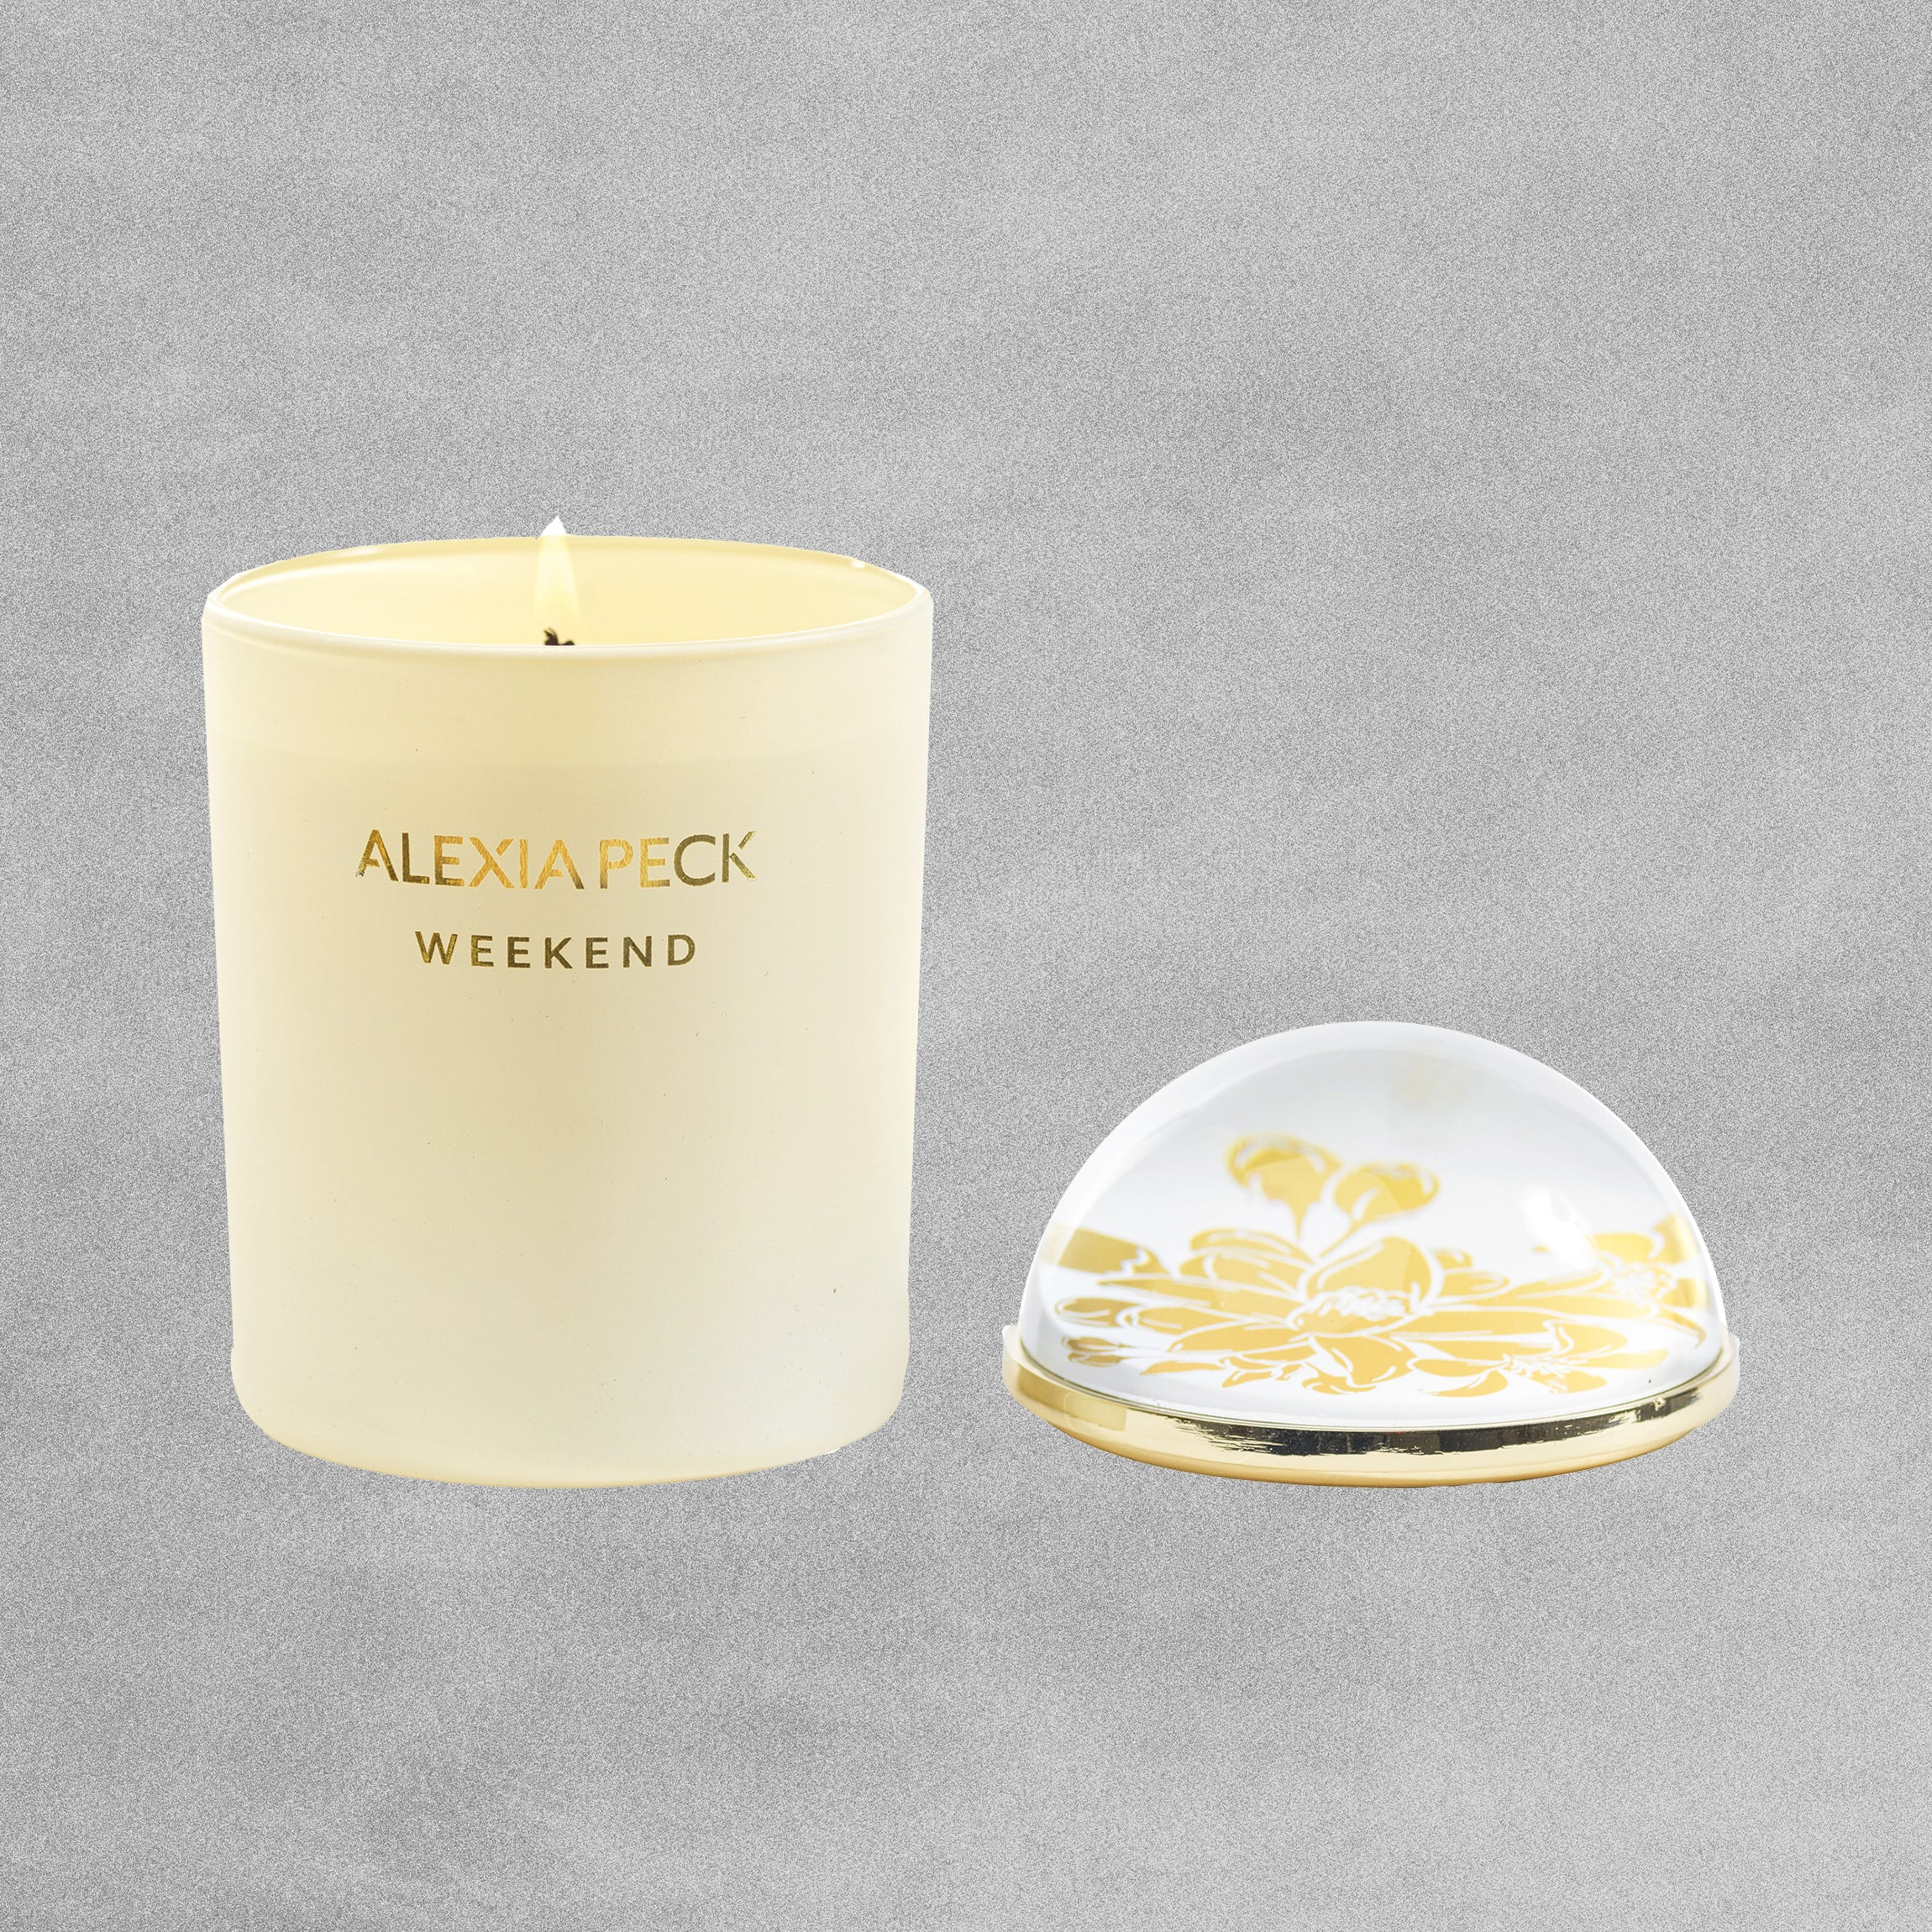 Alexia Peck 'Weekend' Osmanthus & Orange Blossom Candle and Paperweight